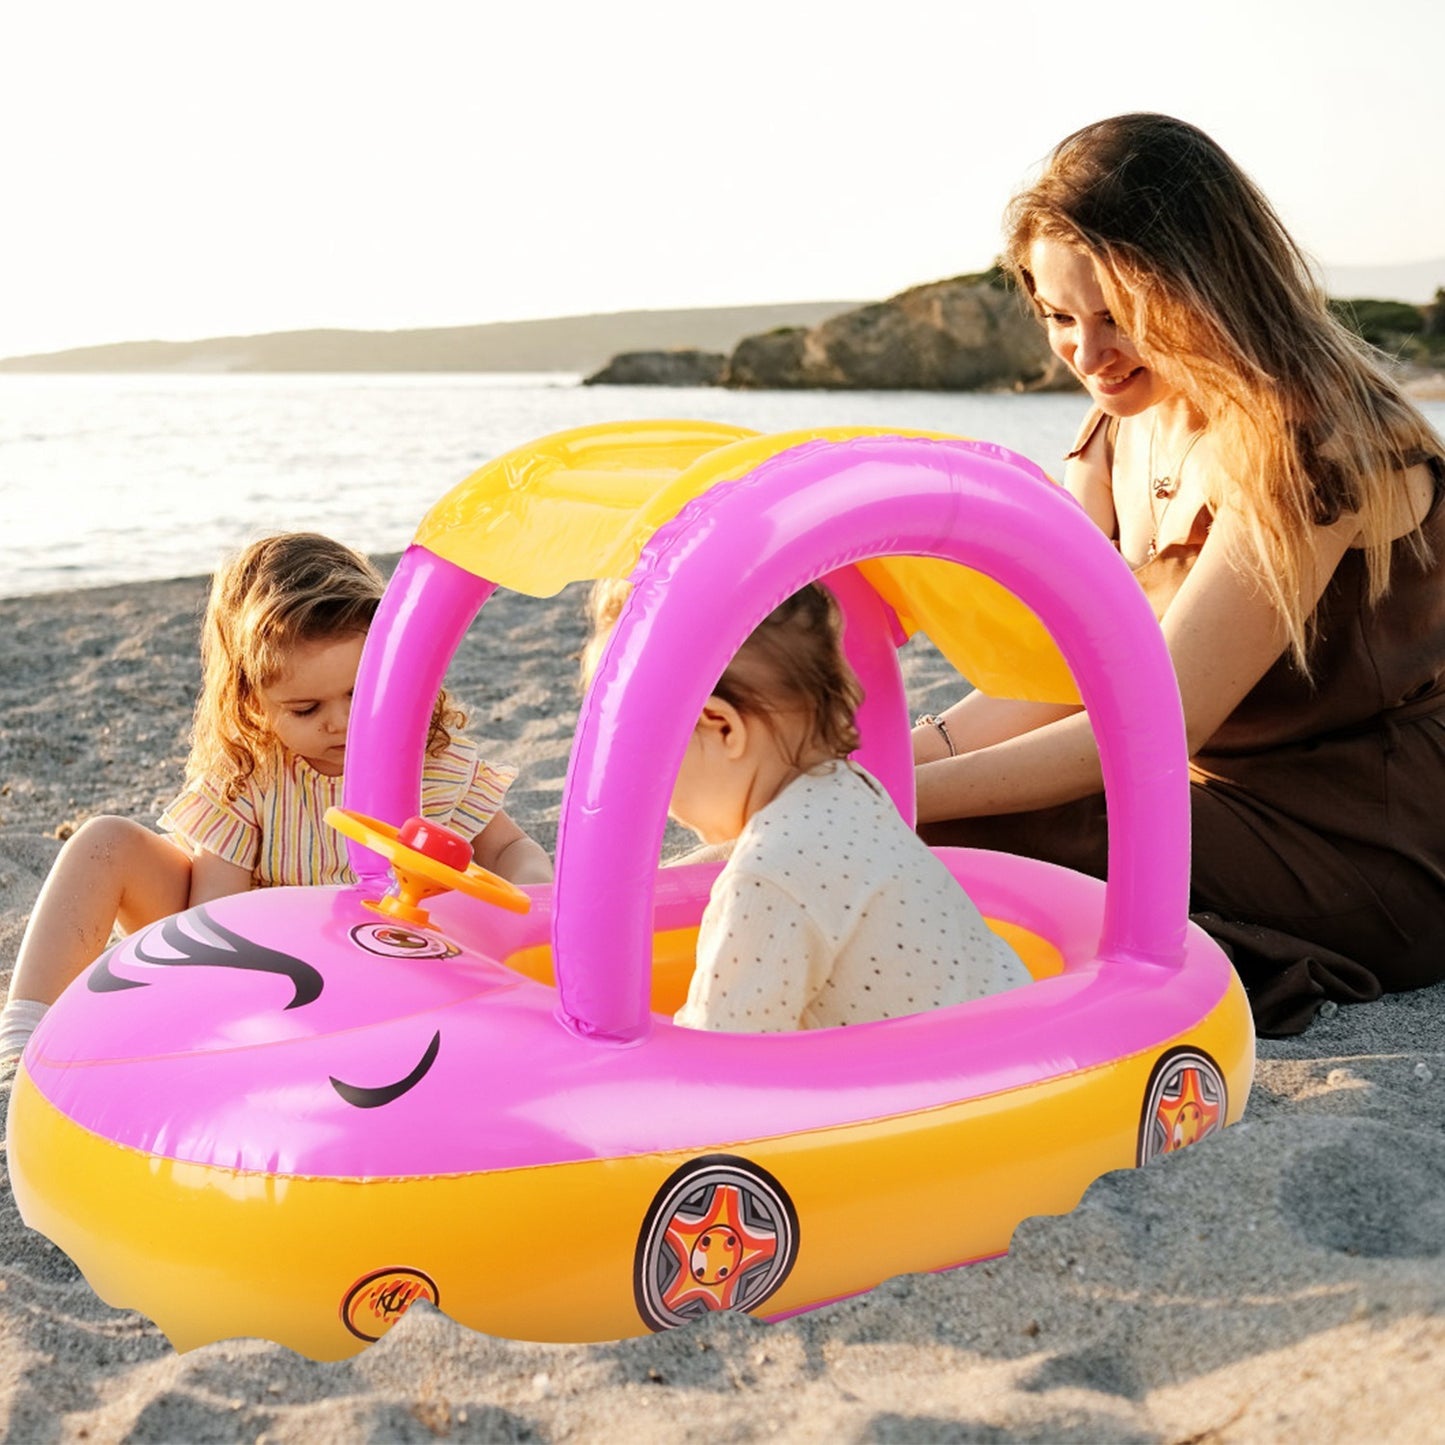 Baby Inflatable Pool Float Car Shaped Toddler Swimming Float Boat Pool Toy Infant Swim Ring Pool with Sun Protection Canopy for 1-3 Year-Old Kids Infant Toddlers